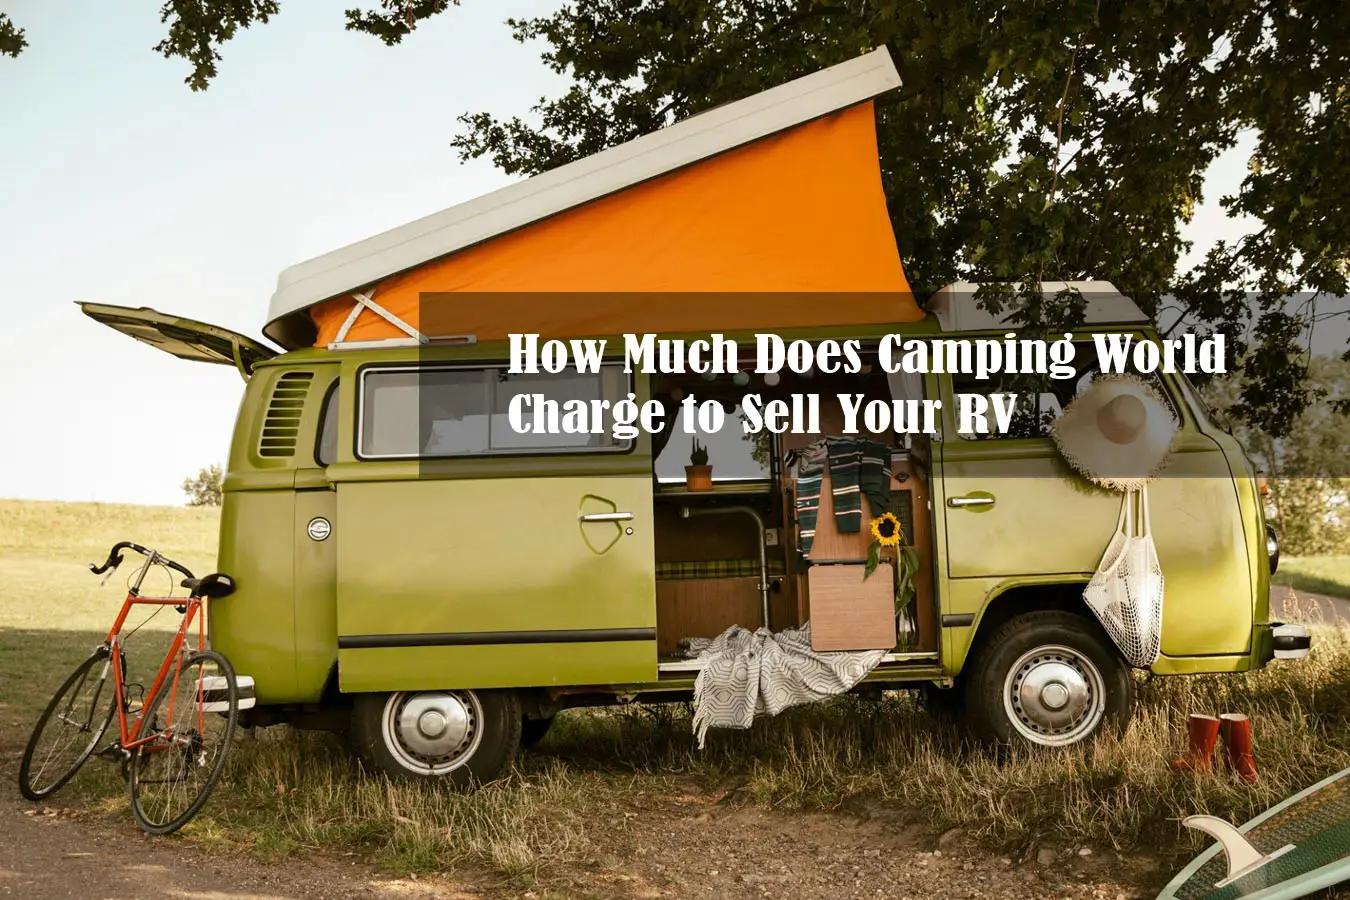 How Much Does Camping World Charge to Sell Your RV